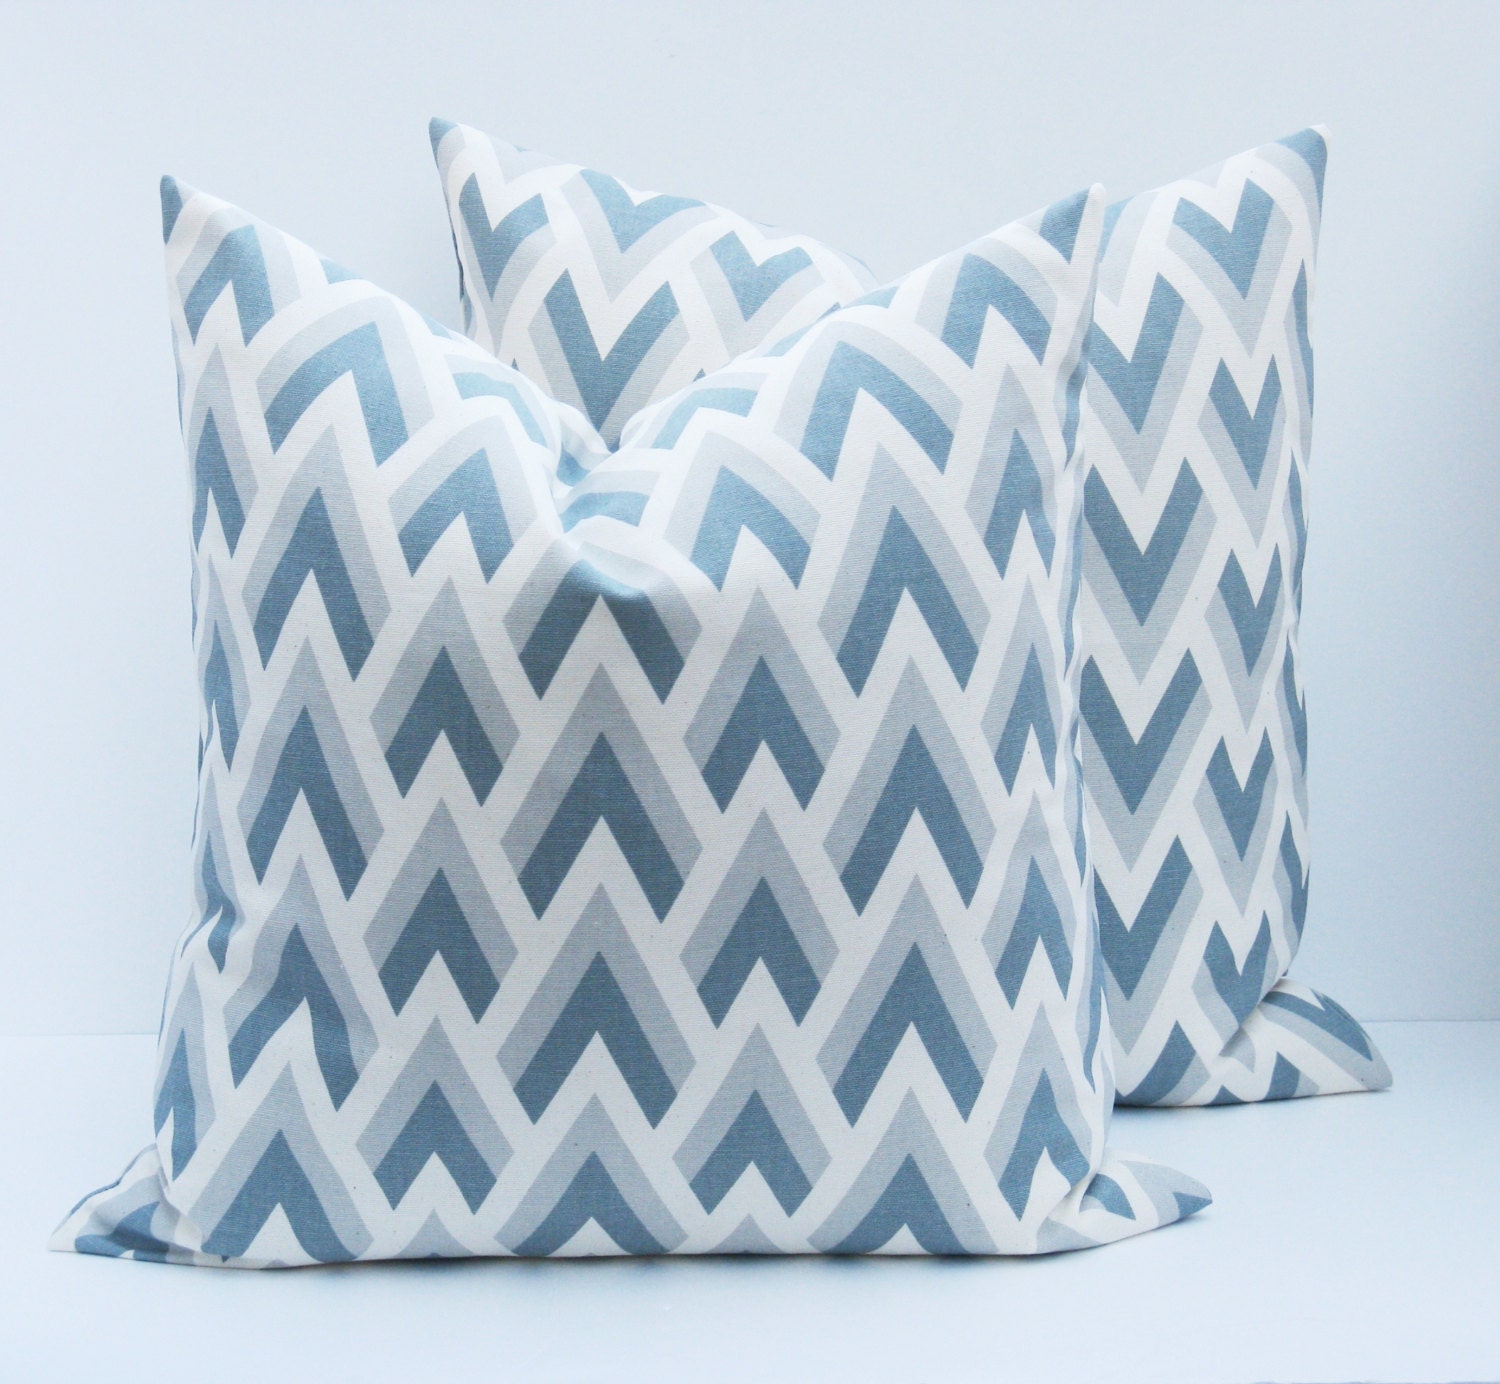 Chevron Pillow Blue Gray Pillow Cover .16x16 Missoni. ZigZag Grey Blue Pillow.Decorative Throw Pillow Covers.Printed fabric both sides